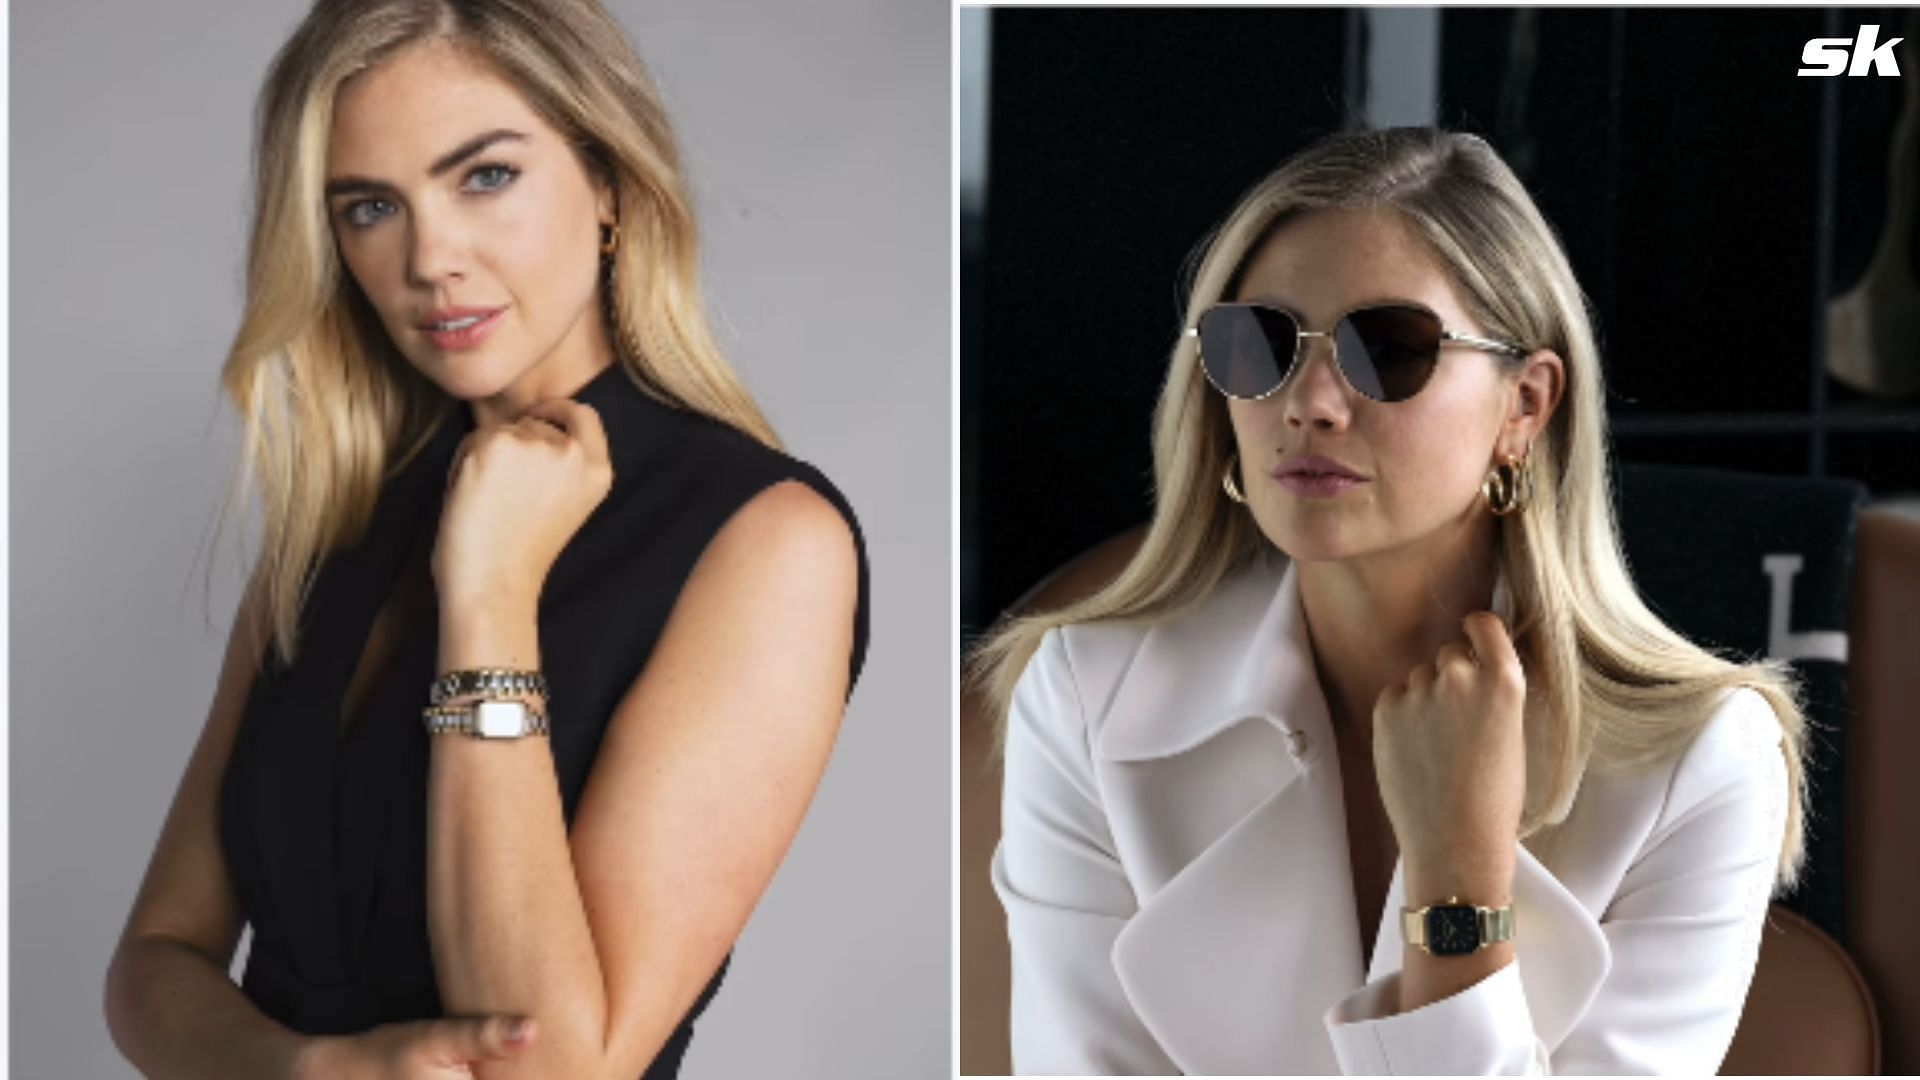 Kate Upton shoots a promotional video for Anne Klein